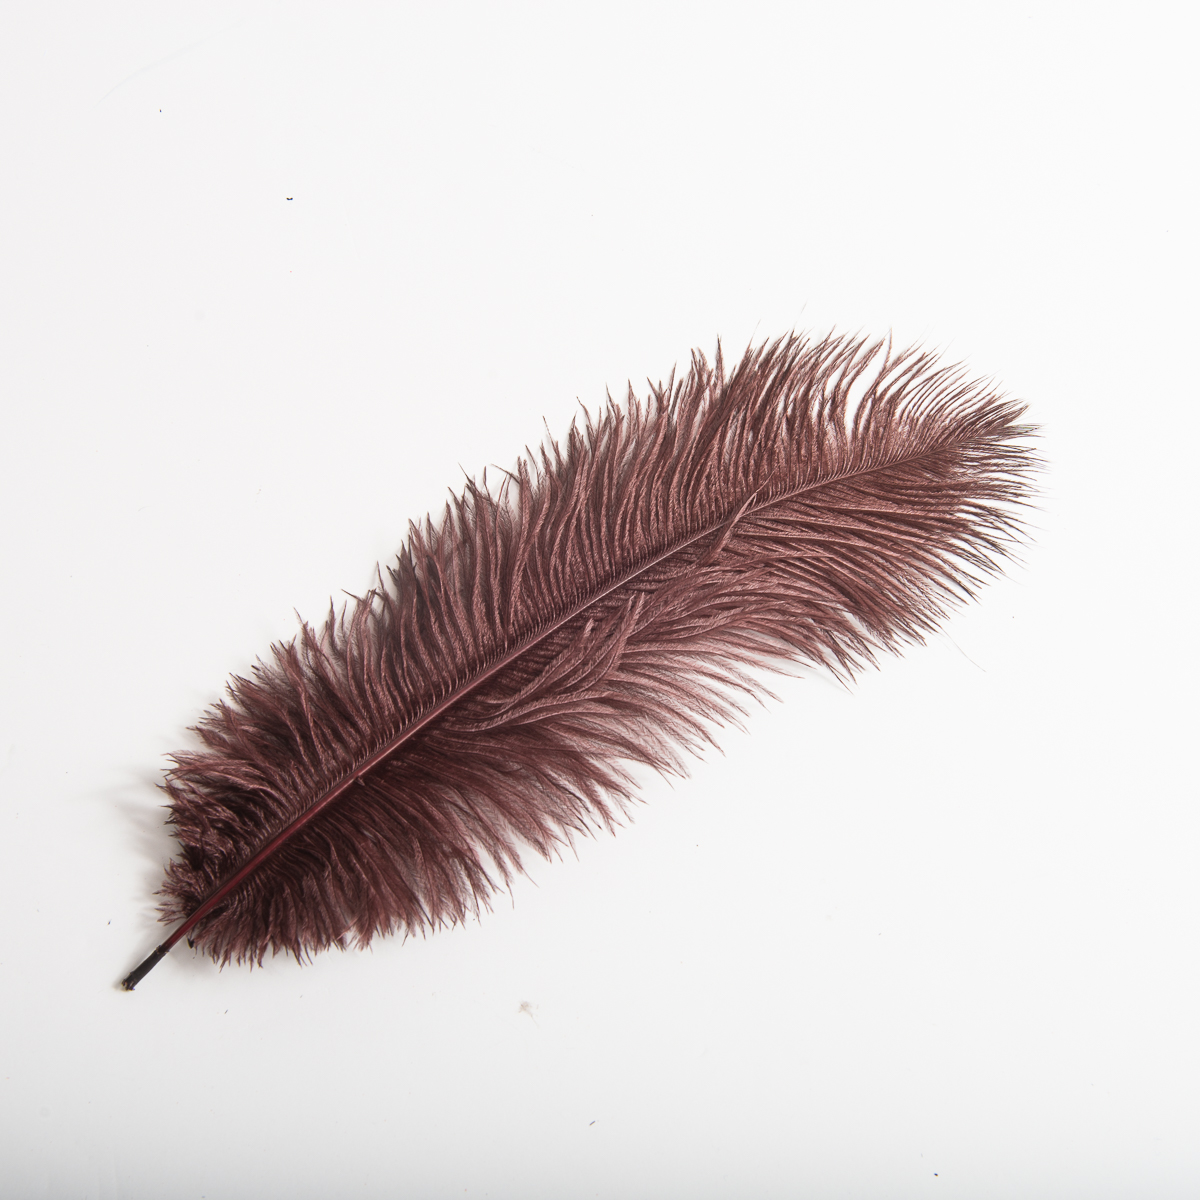 brown ostrich feathers